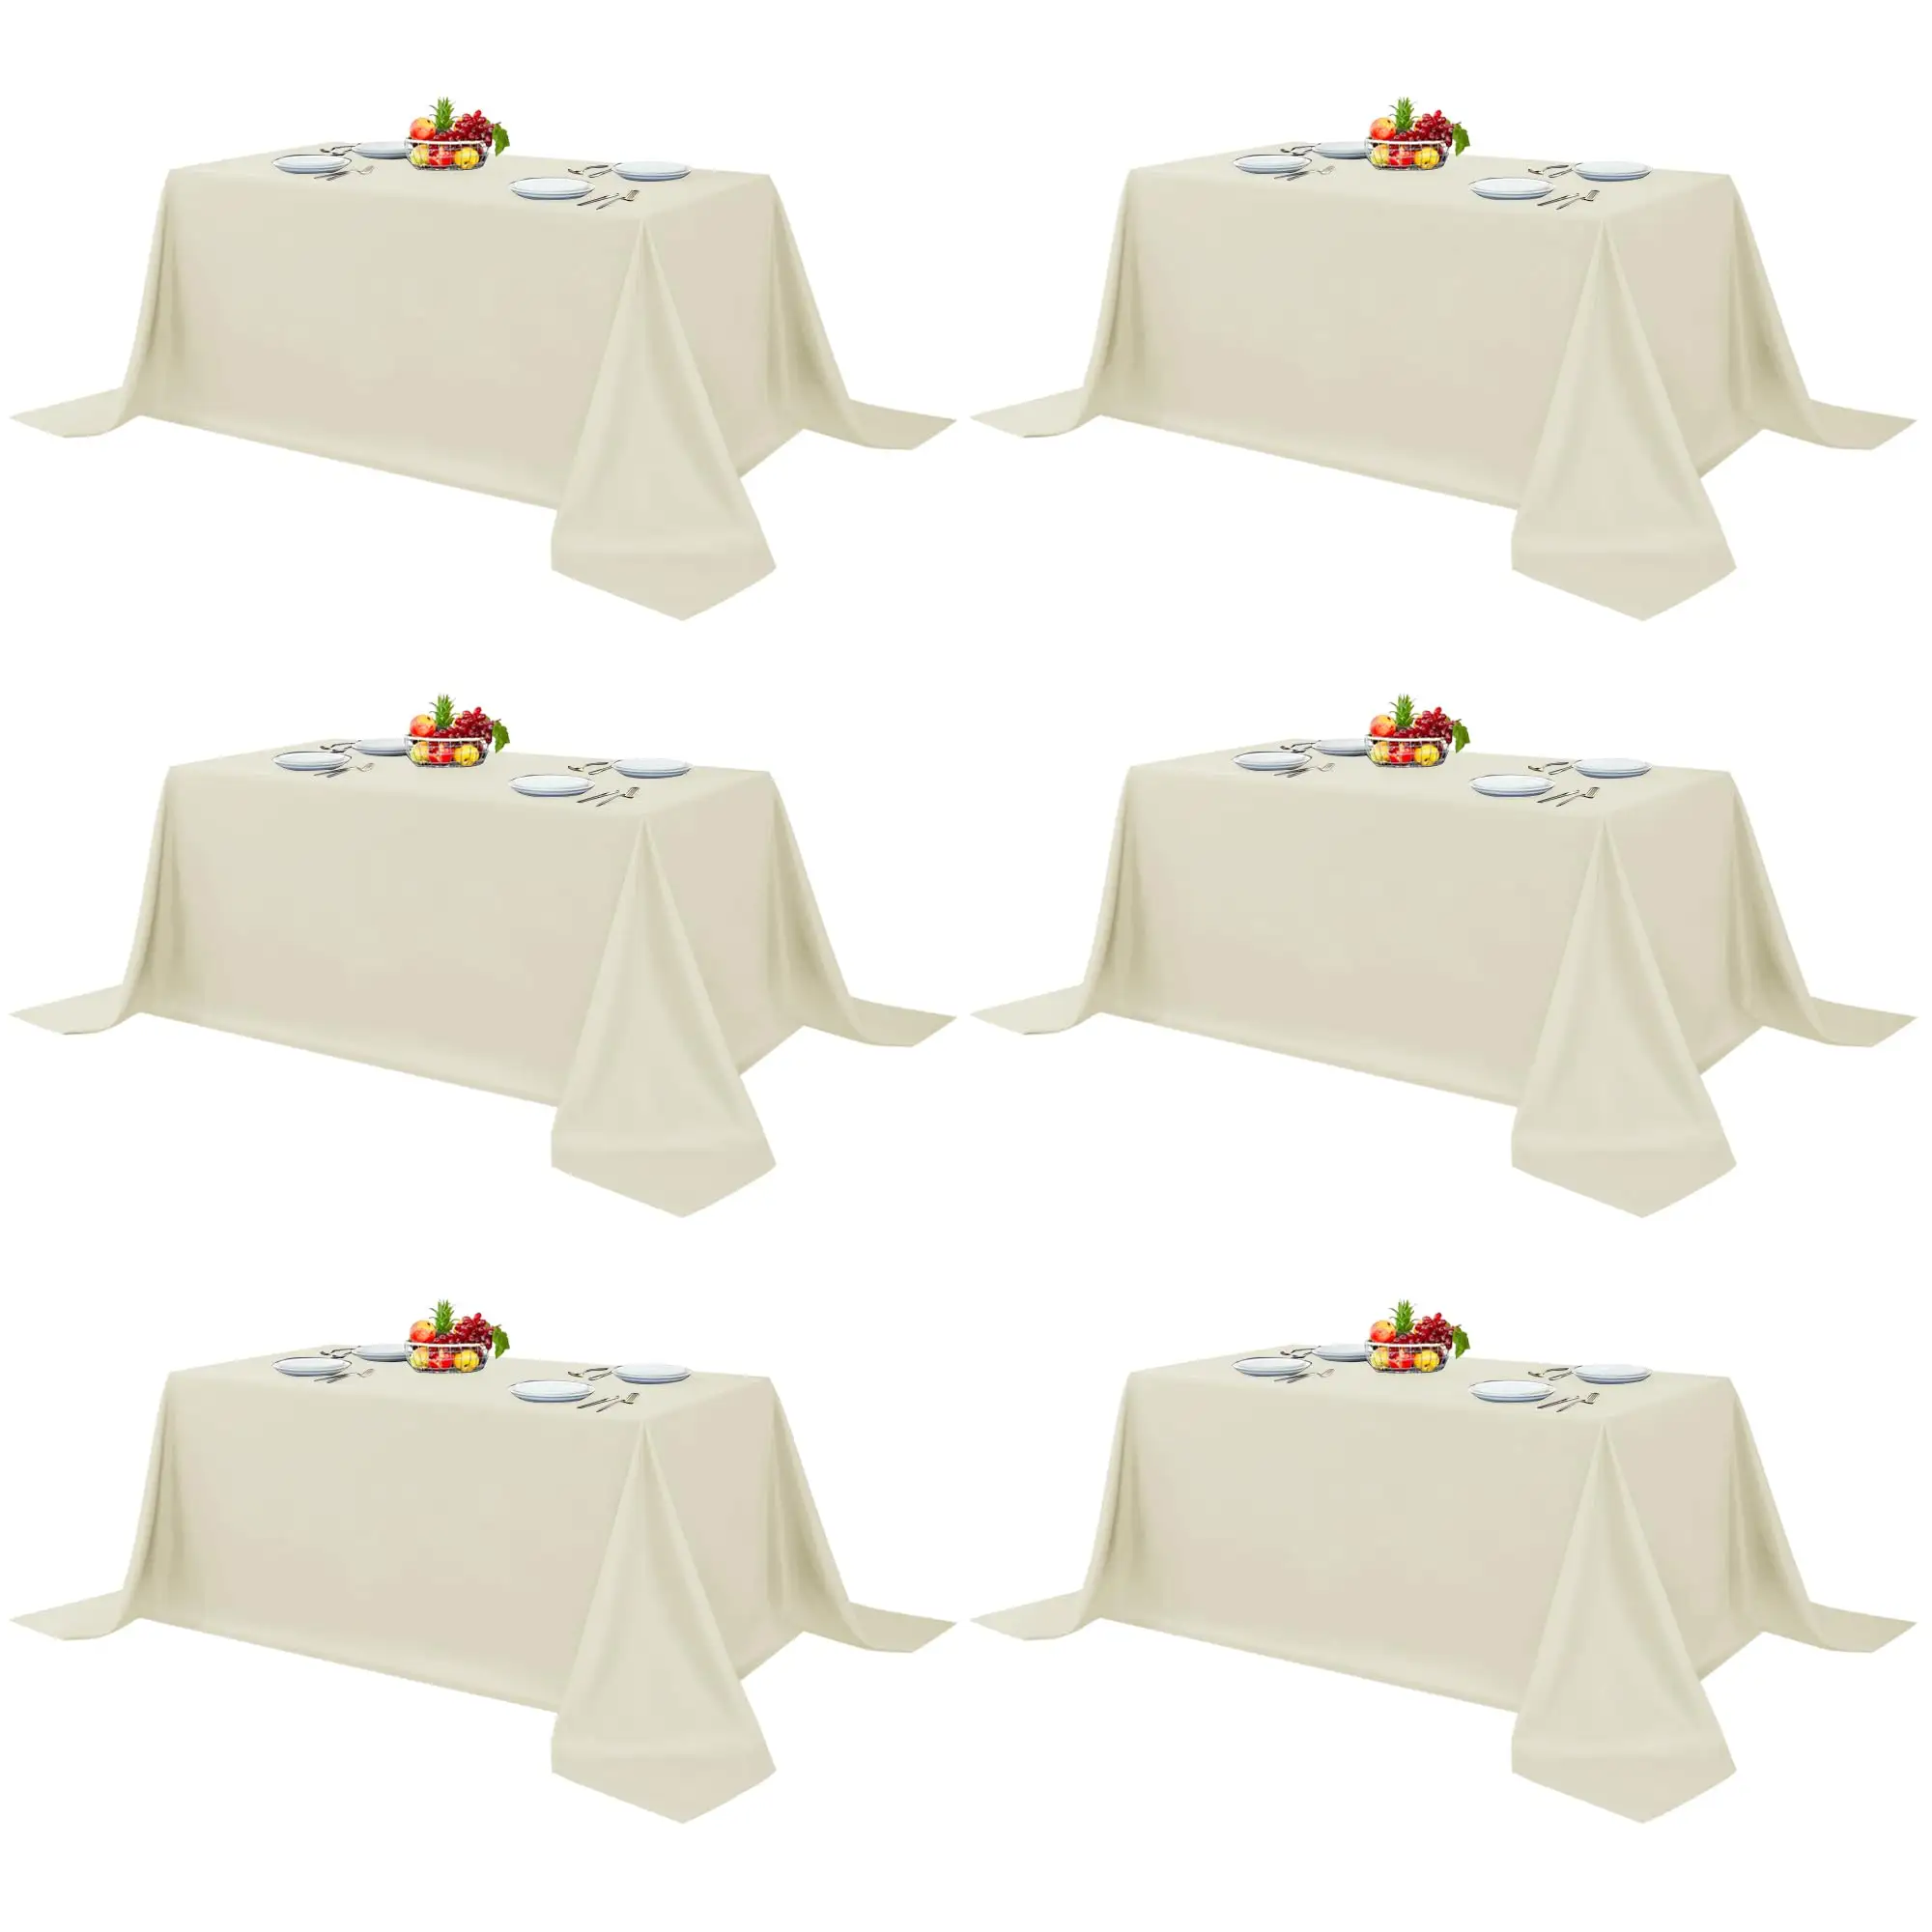 New Wholesale Custom Stain Resistant and Washable Table Clothes, Polyester Fabric Table Covers